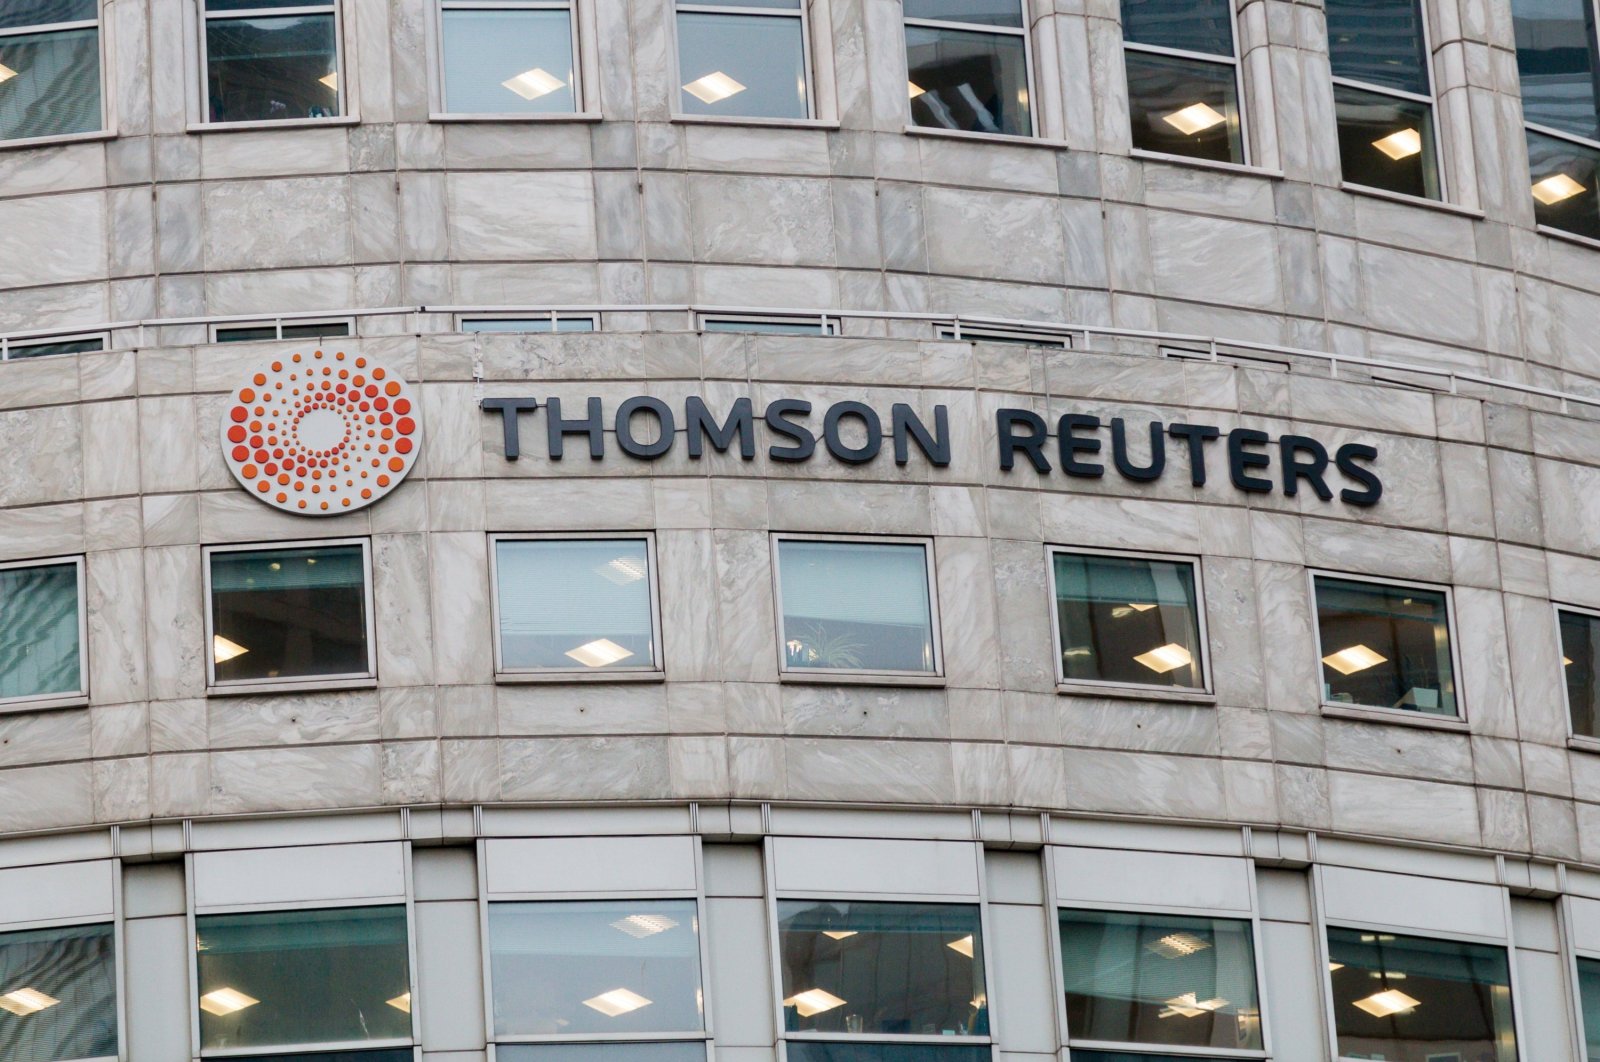 The Thomson Reuters headquarters building in Canary Wharf, London, Britain, Nov. 15, 2017. (Shutterstock Photo)